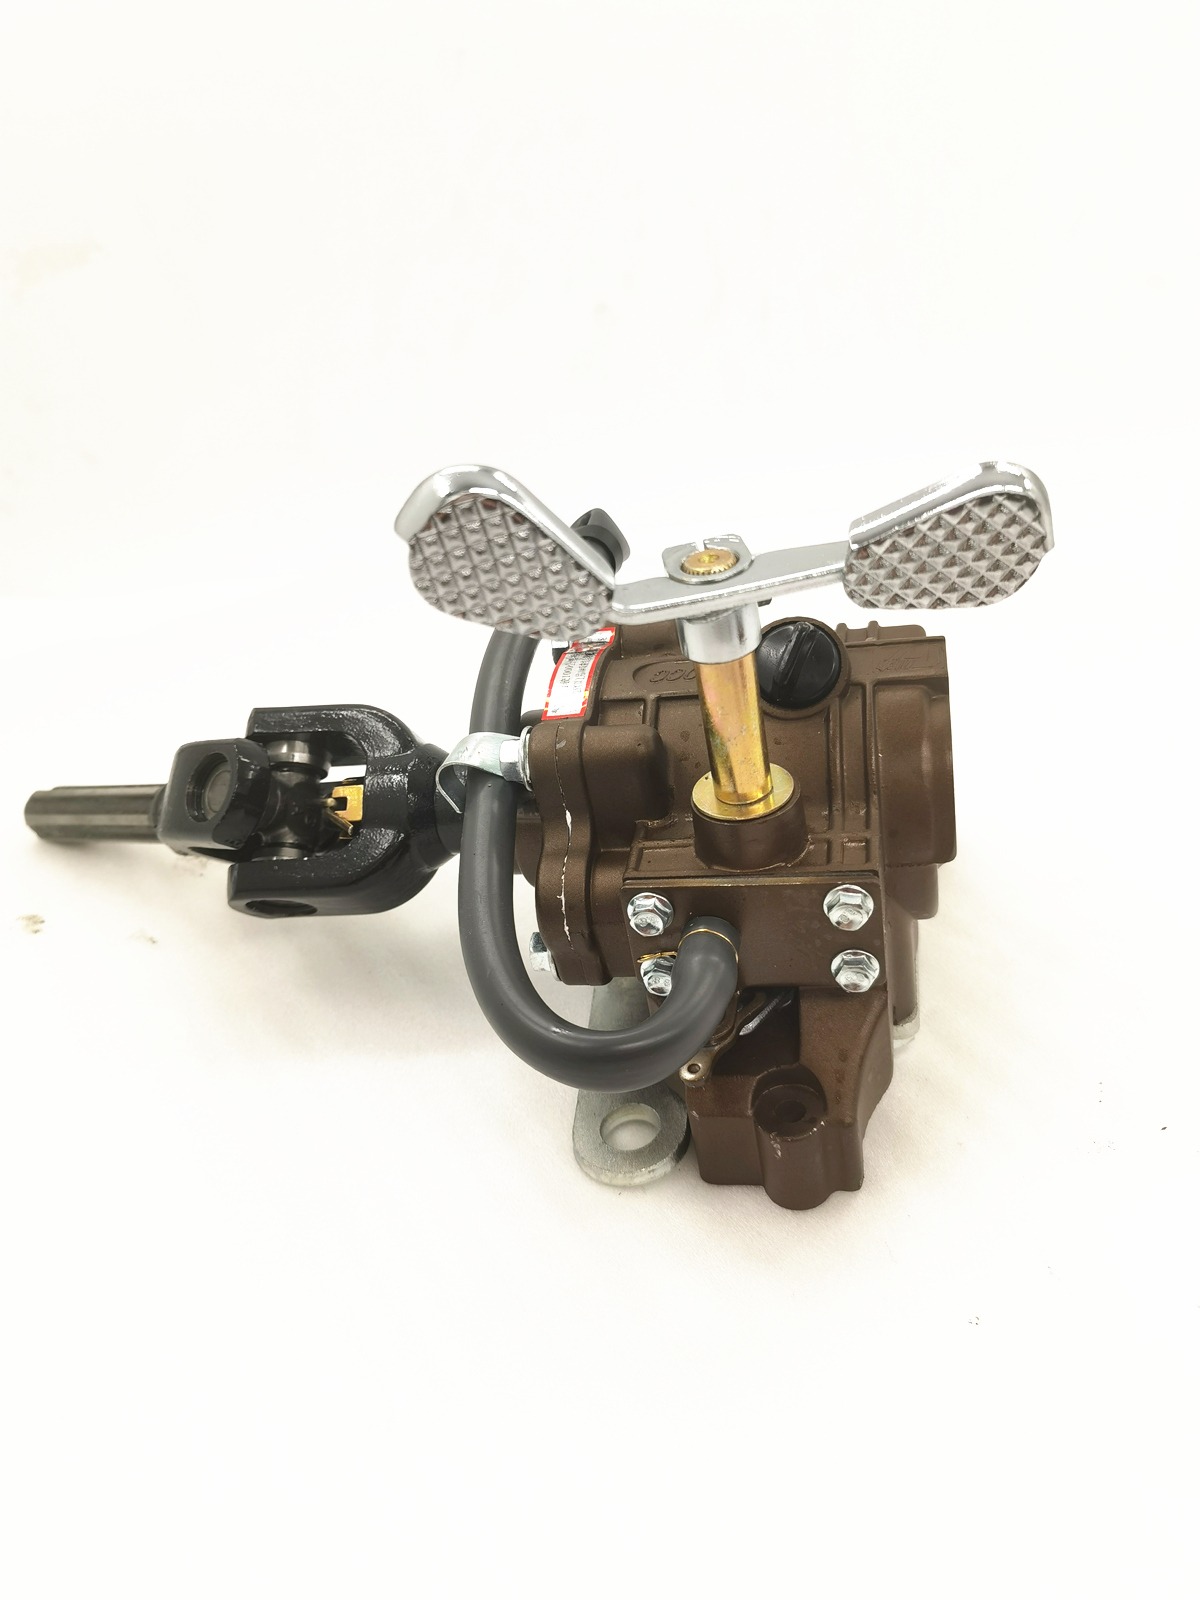 Brand new DAYANG Chuanyu 280 reverse gear box for Engine Motor Trike 3 Wheel Motorcycle Tricycle with big size base plate